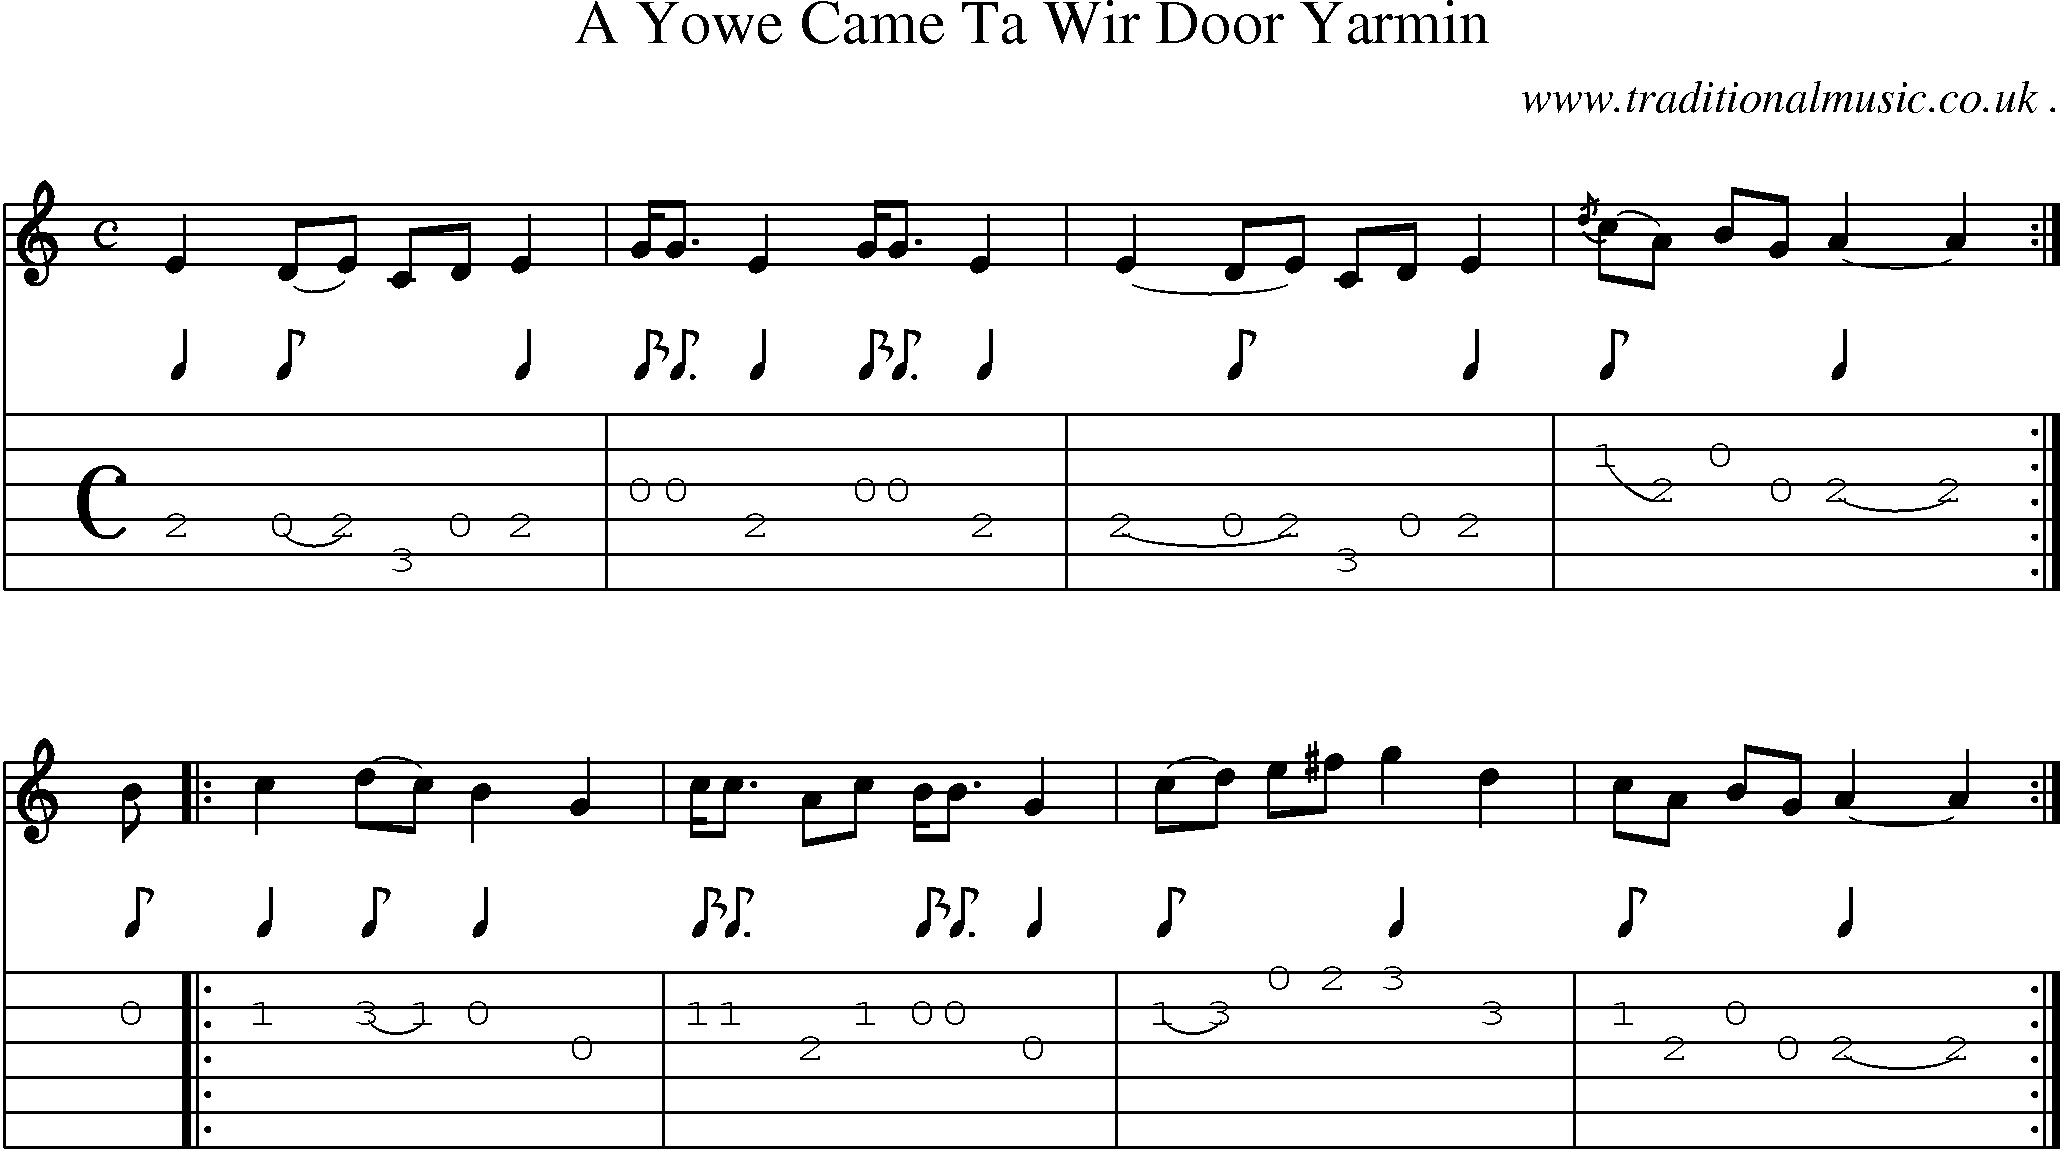 Sheet-music  score, Chords and Guitar Tabs for A Yowe Came Ta Wir Door Yarmin